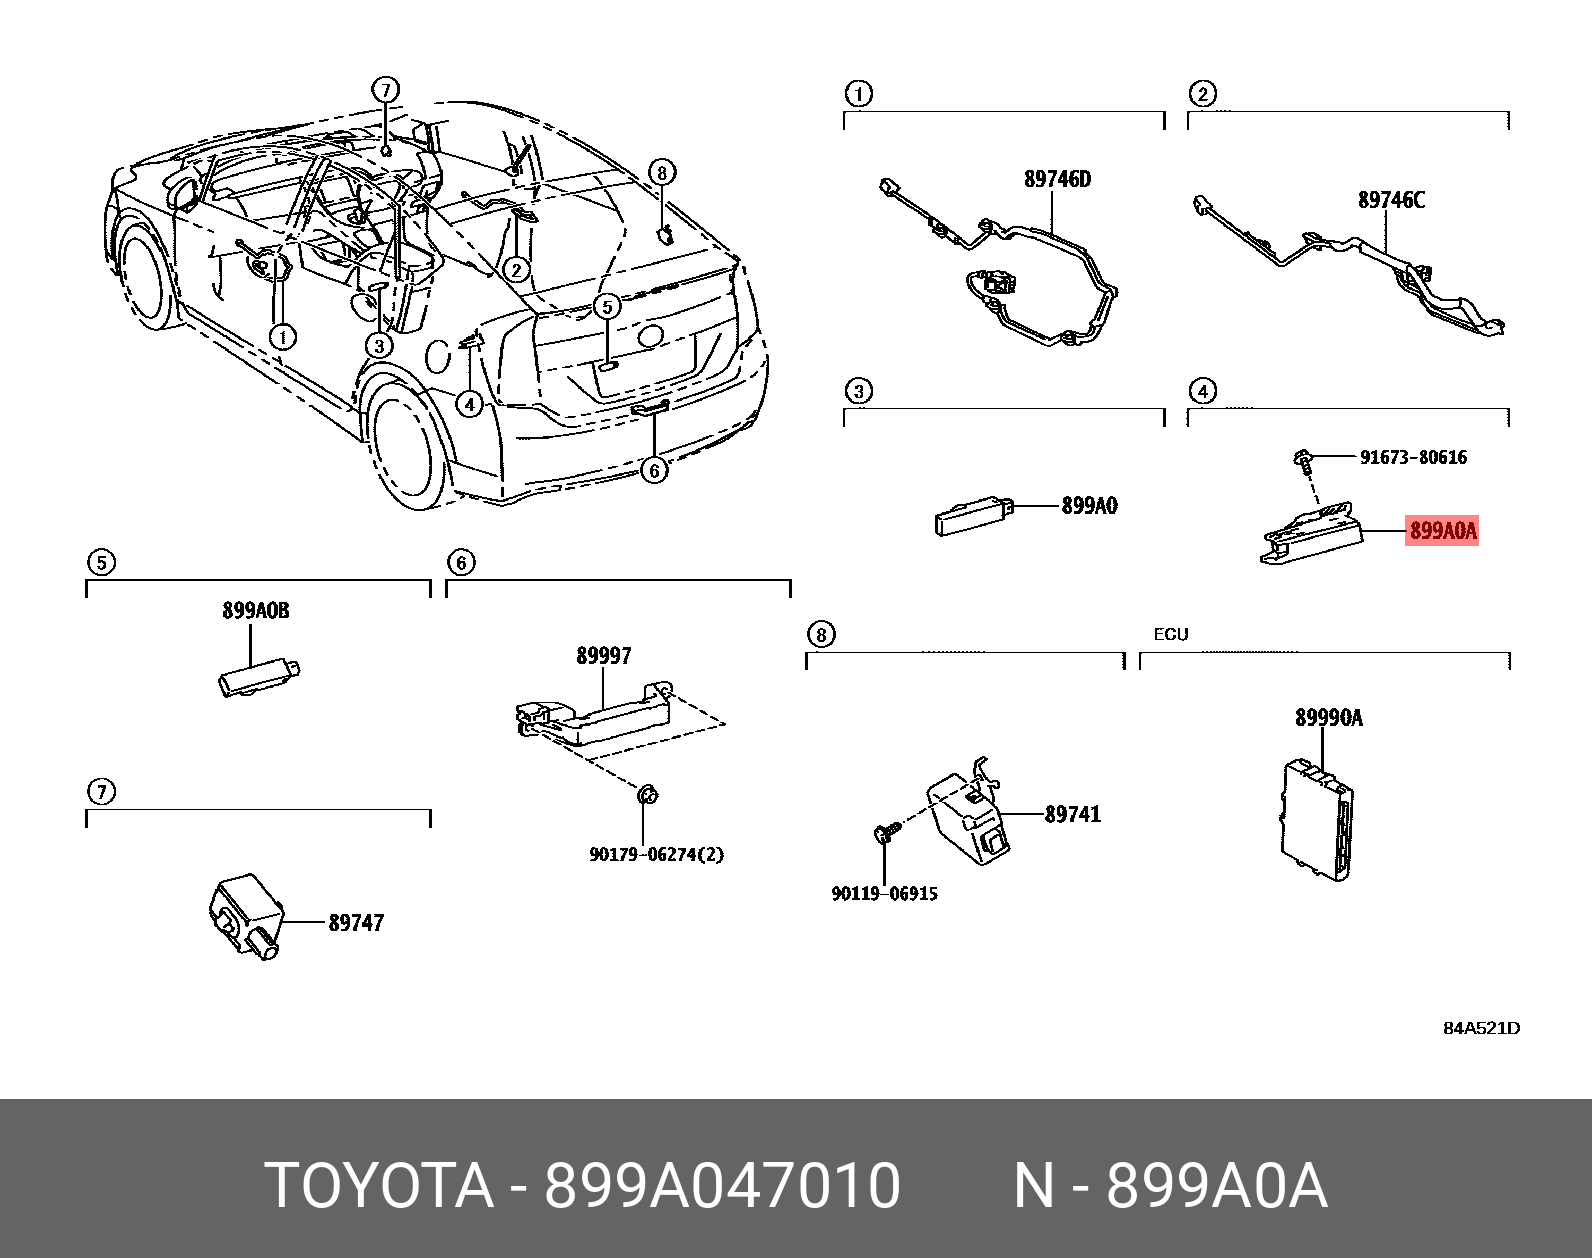 CAMRY 201706-, ANTENNA ASSY, INDOOR ELECTRICAL KEY, NO.1